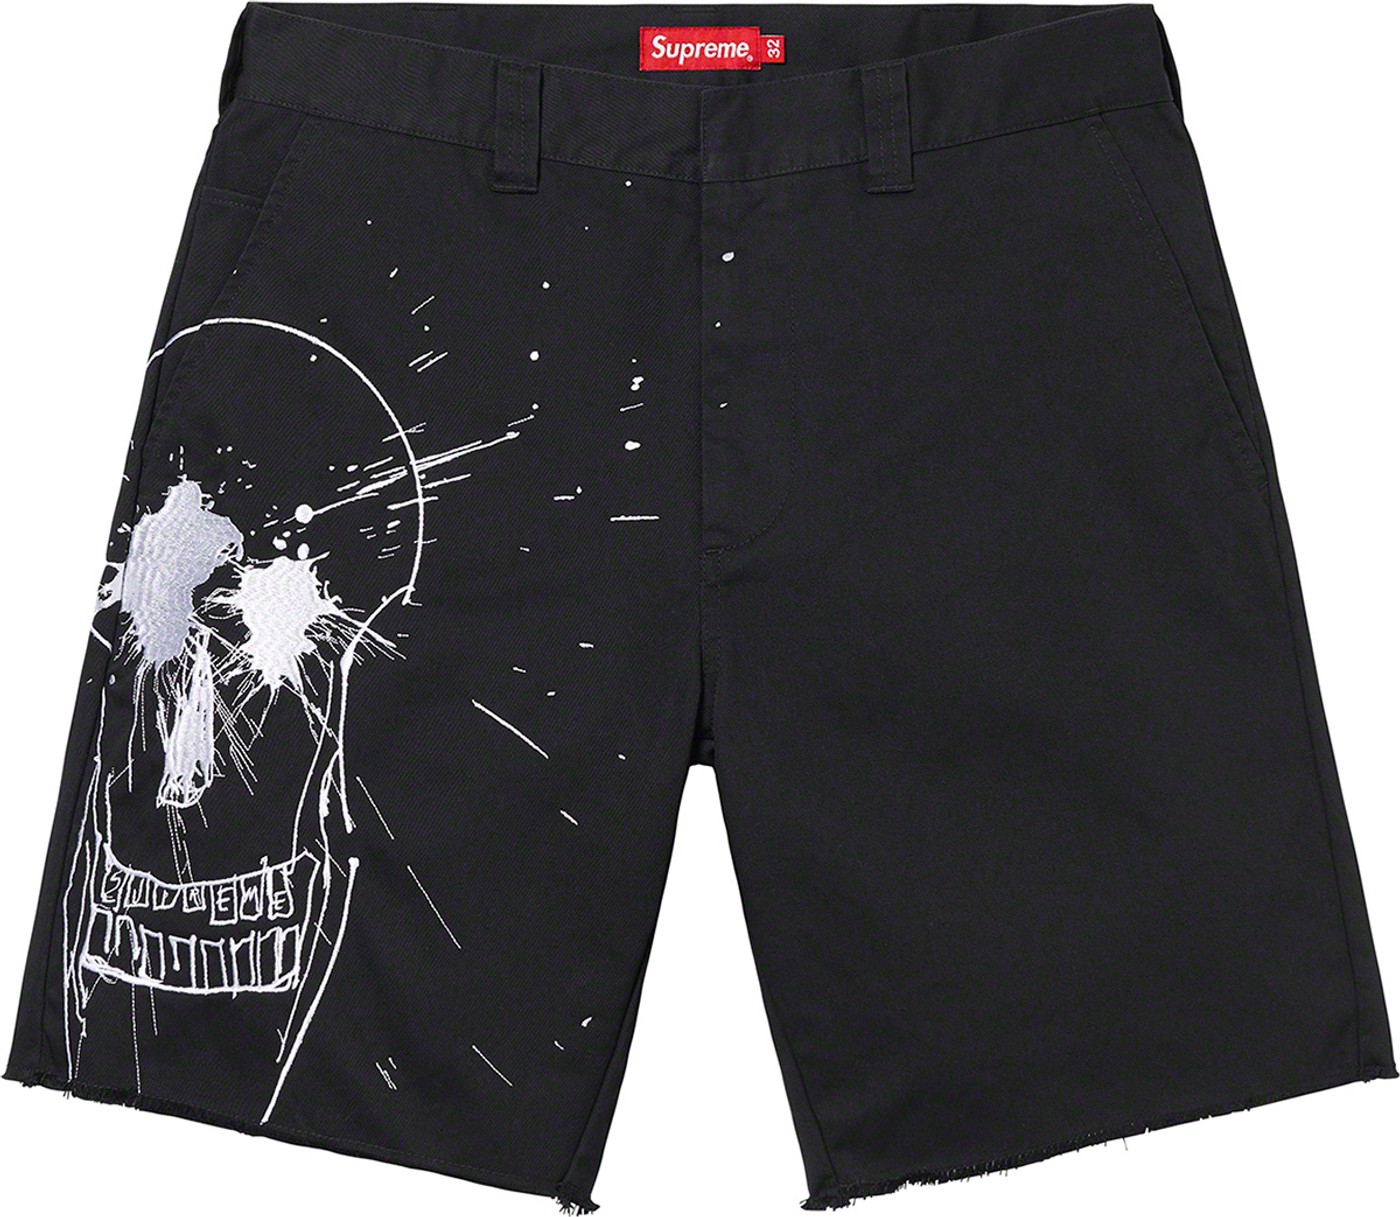 Authentic re-worked Supreme compression cycle shorts with Supreme